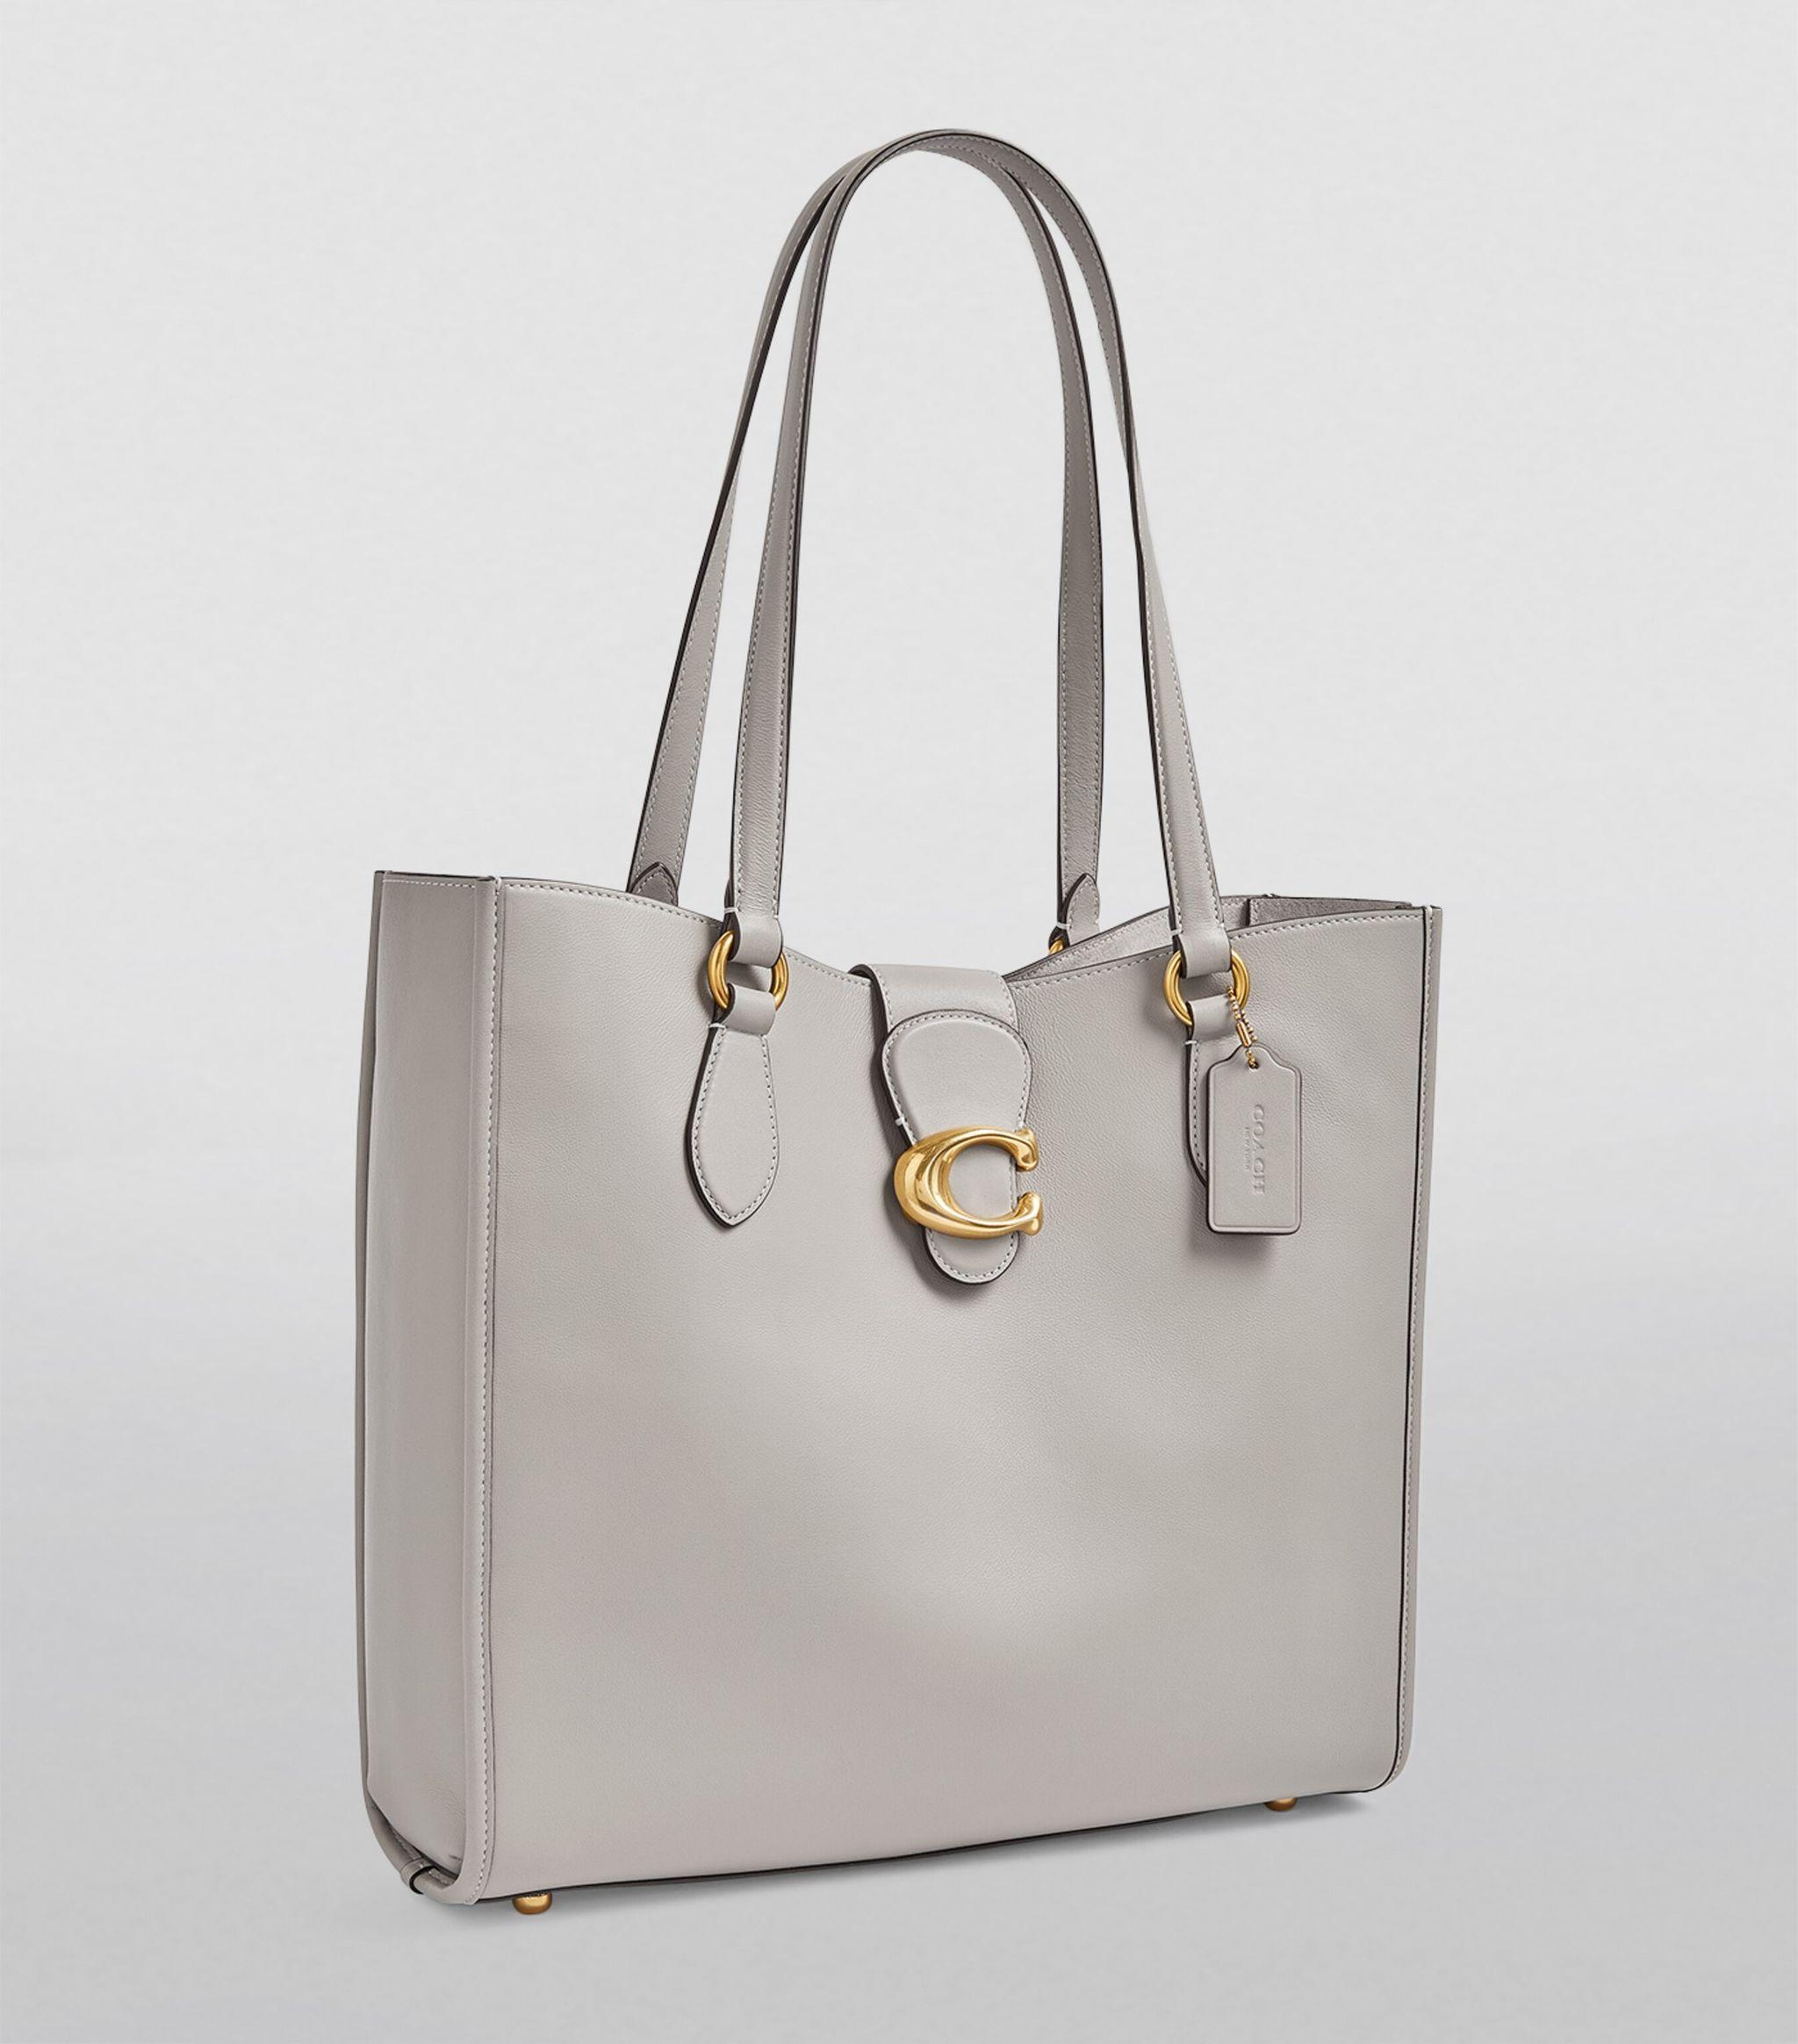 COACH Leather Theo Tote Bag in Gray